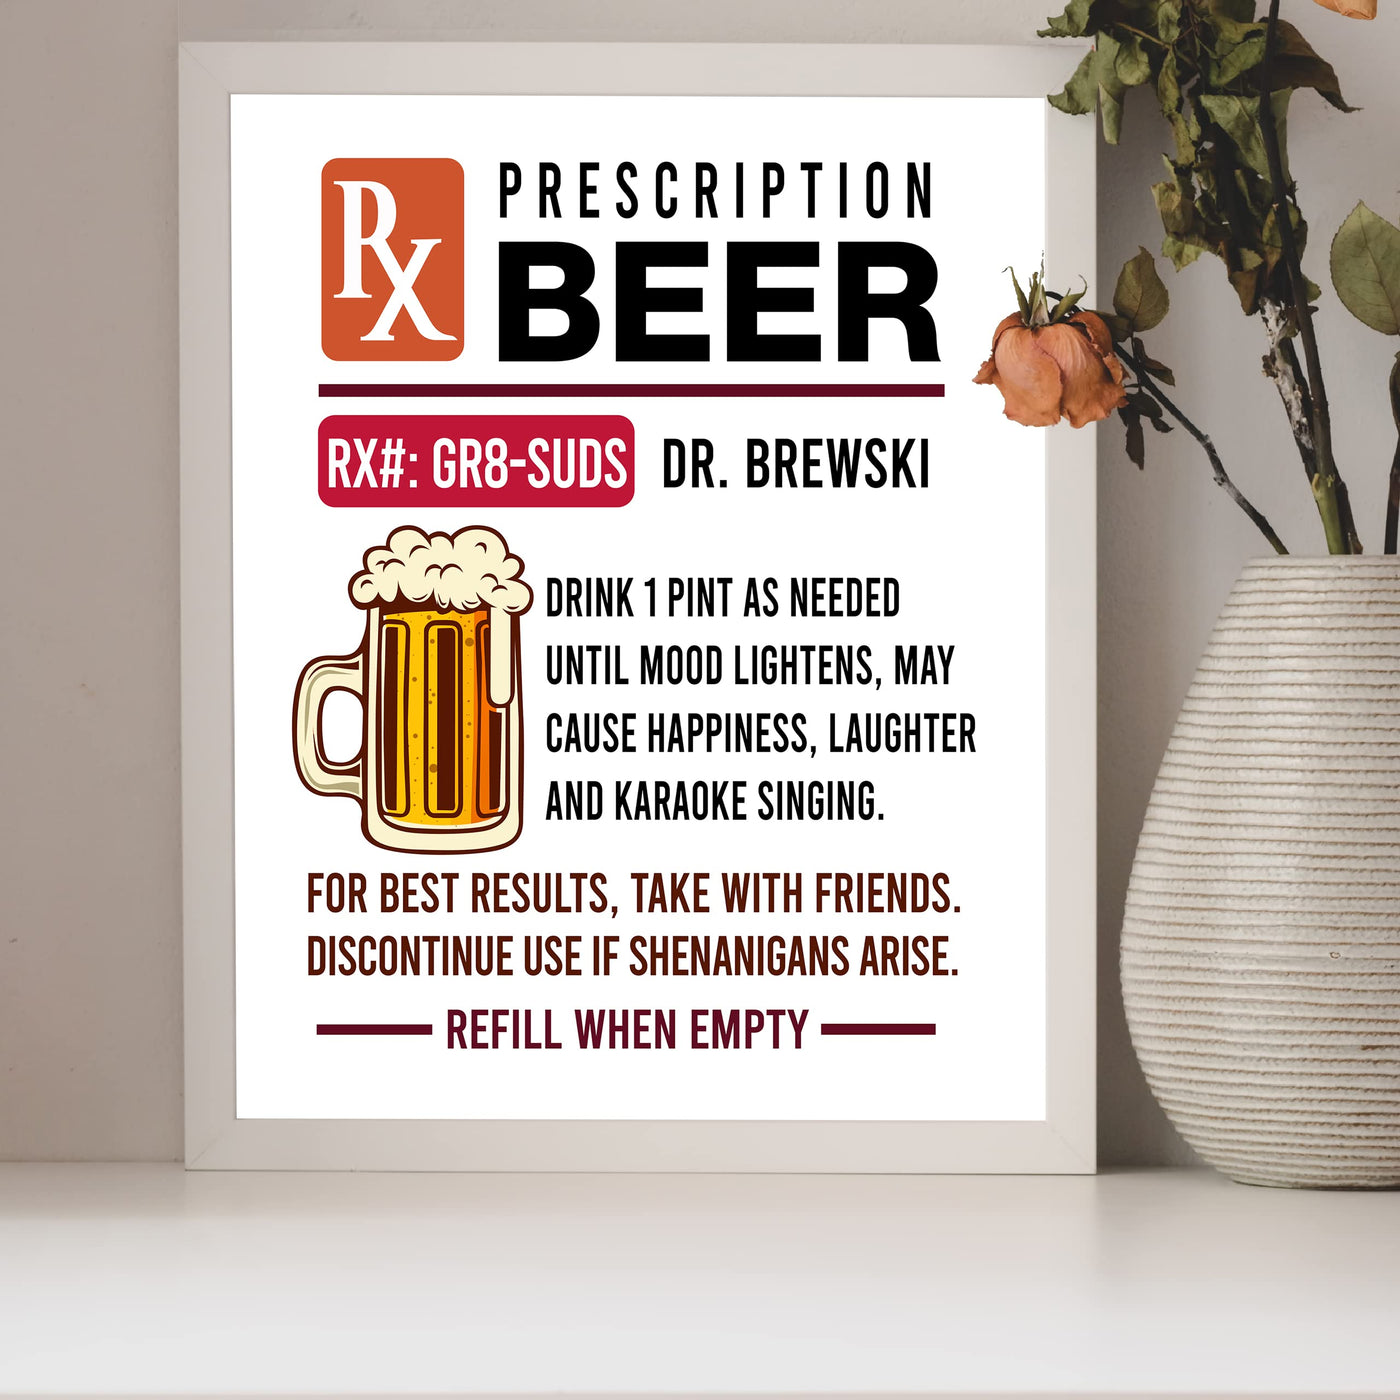 Prescription Beer -Dr. Brewski Funny Beer & Alcohol Wall Sign -8 x 10" Rustic Bar Wall Art Print -Ready to Frame. Retro Home-Patio-Garage-Shop-Pub Decor. Fun Man Cave Decoration for Drinkers!